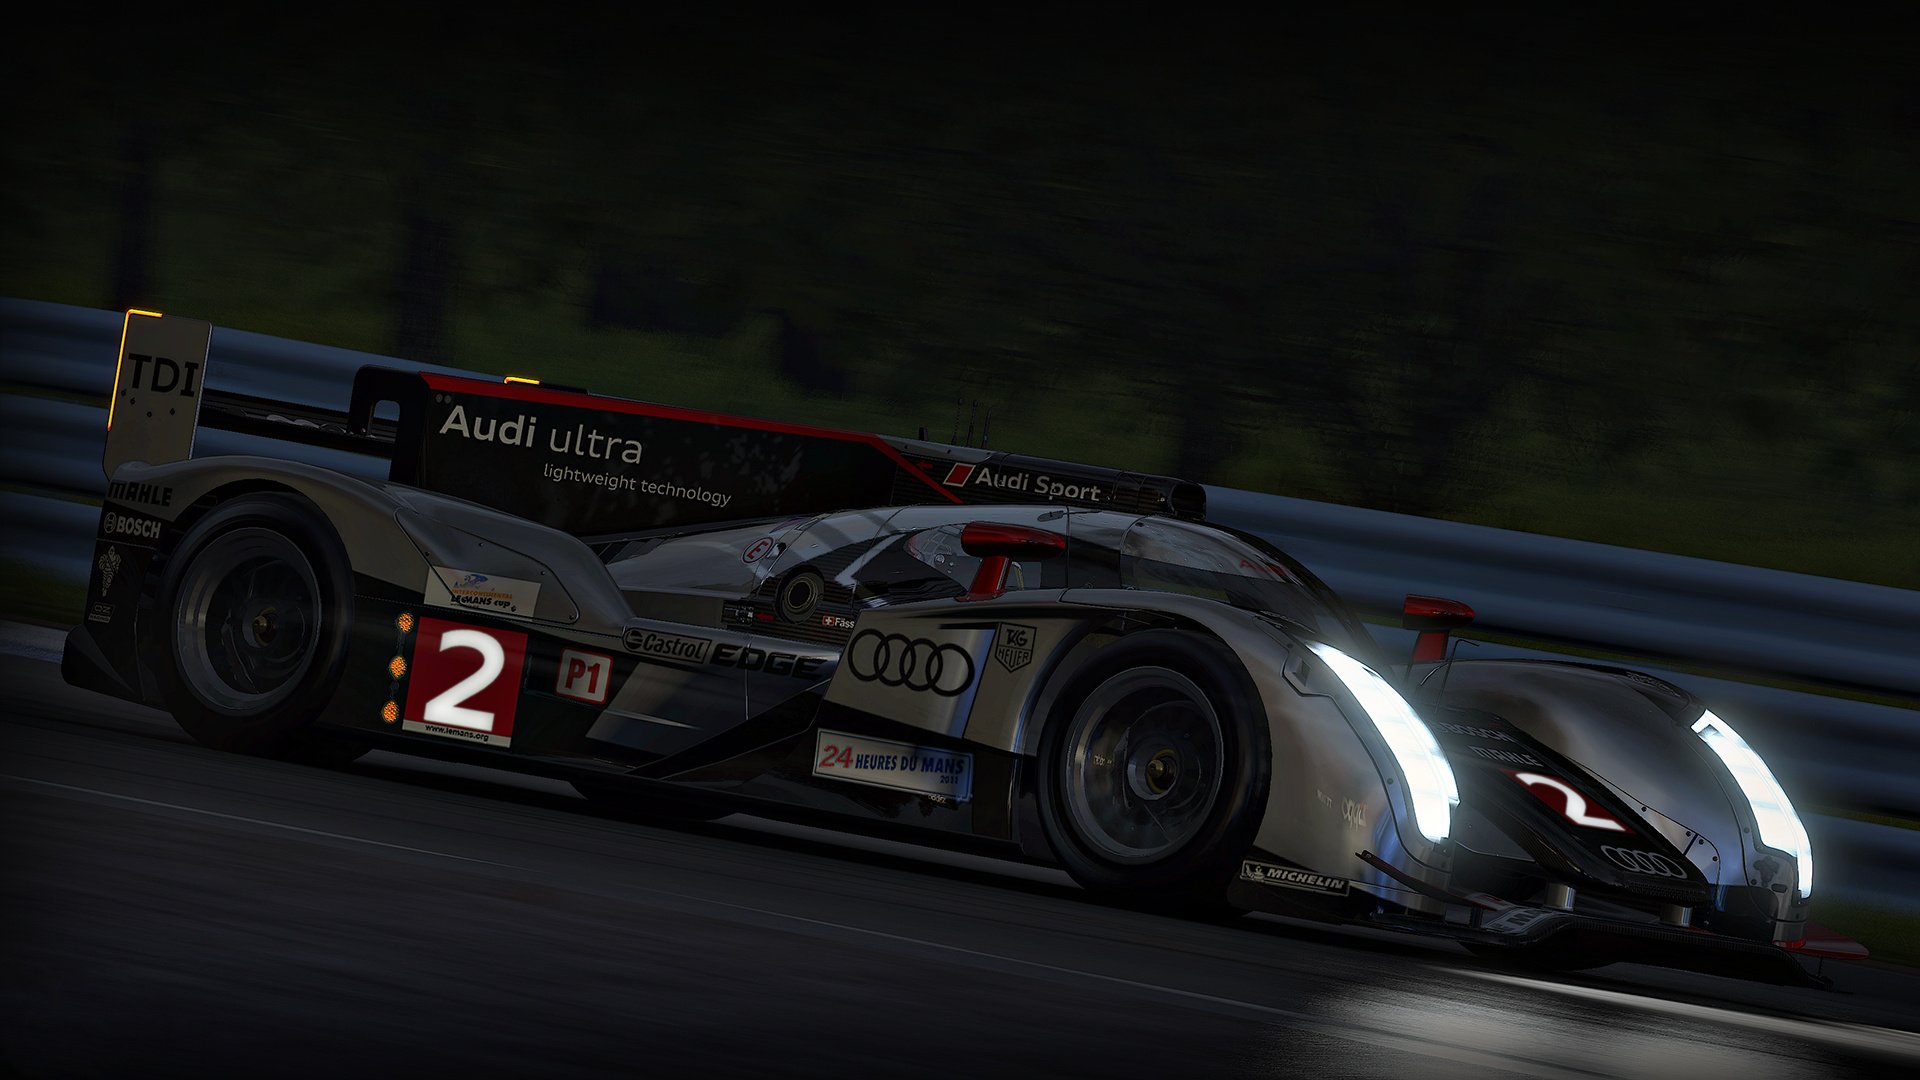 download project cars ps4